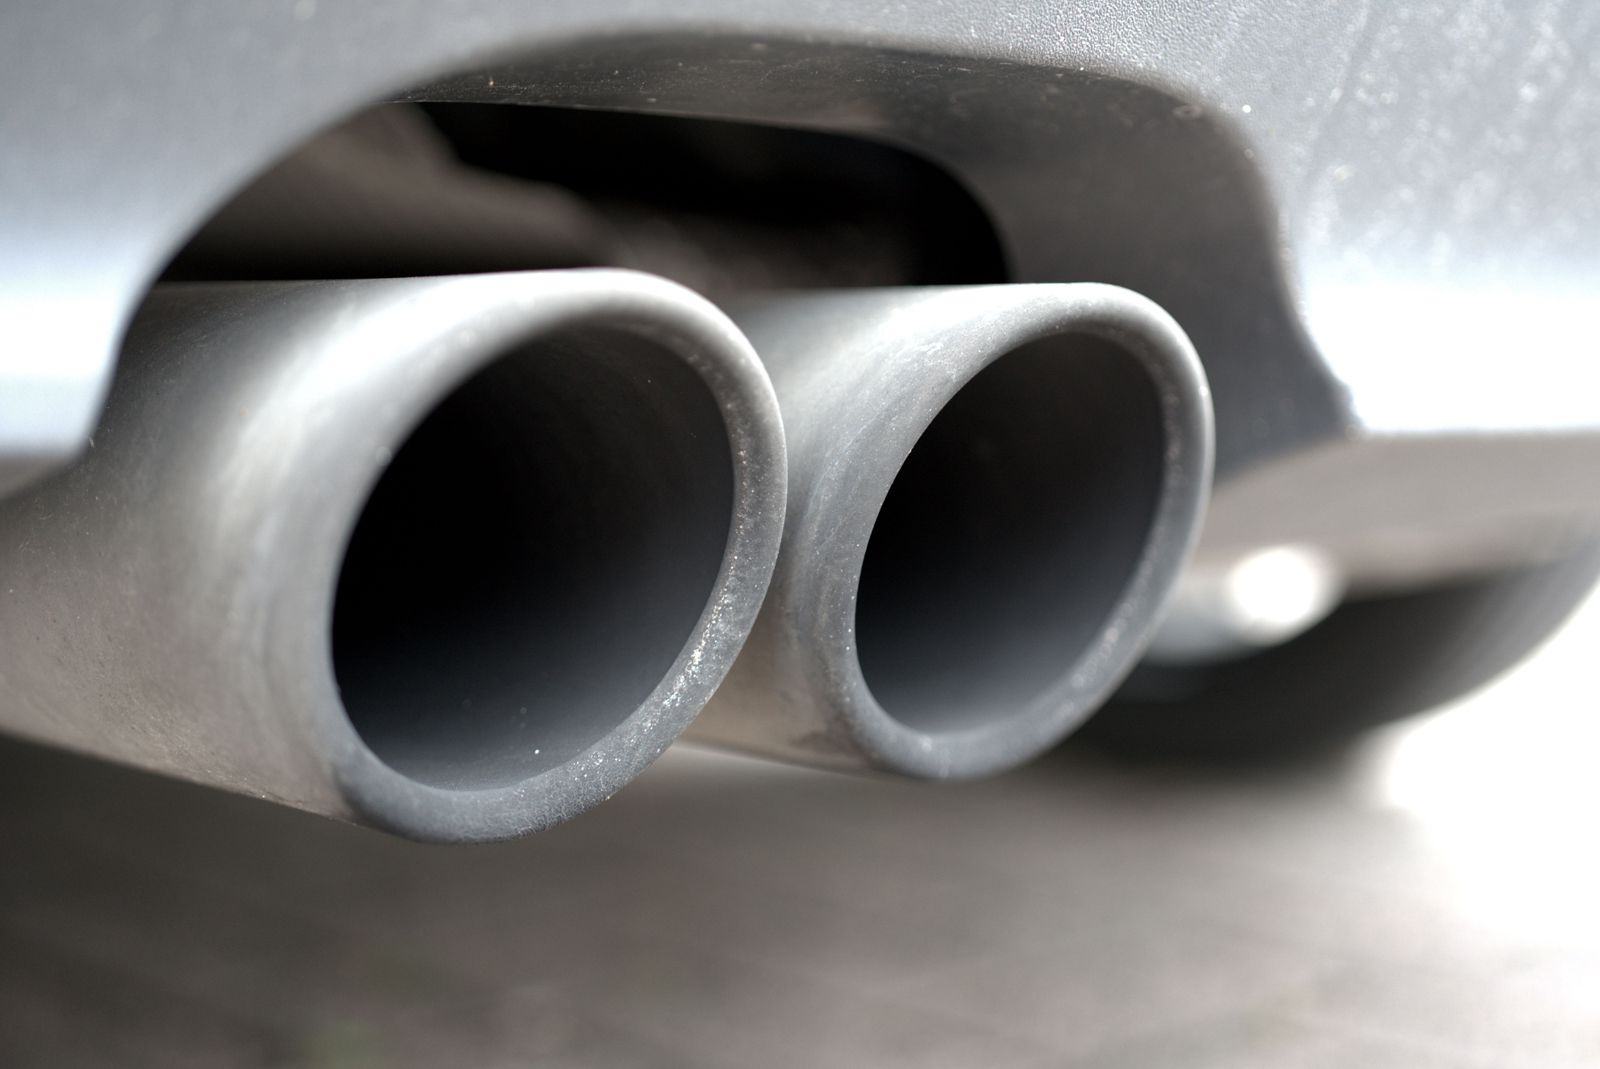 The tipo of an exhaust pipe on a motor vehicle